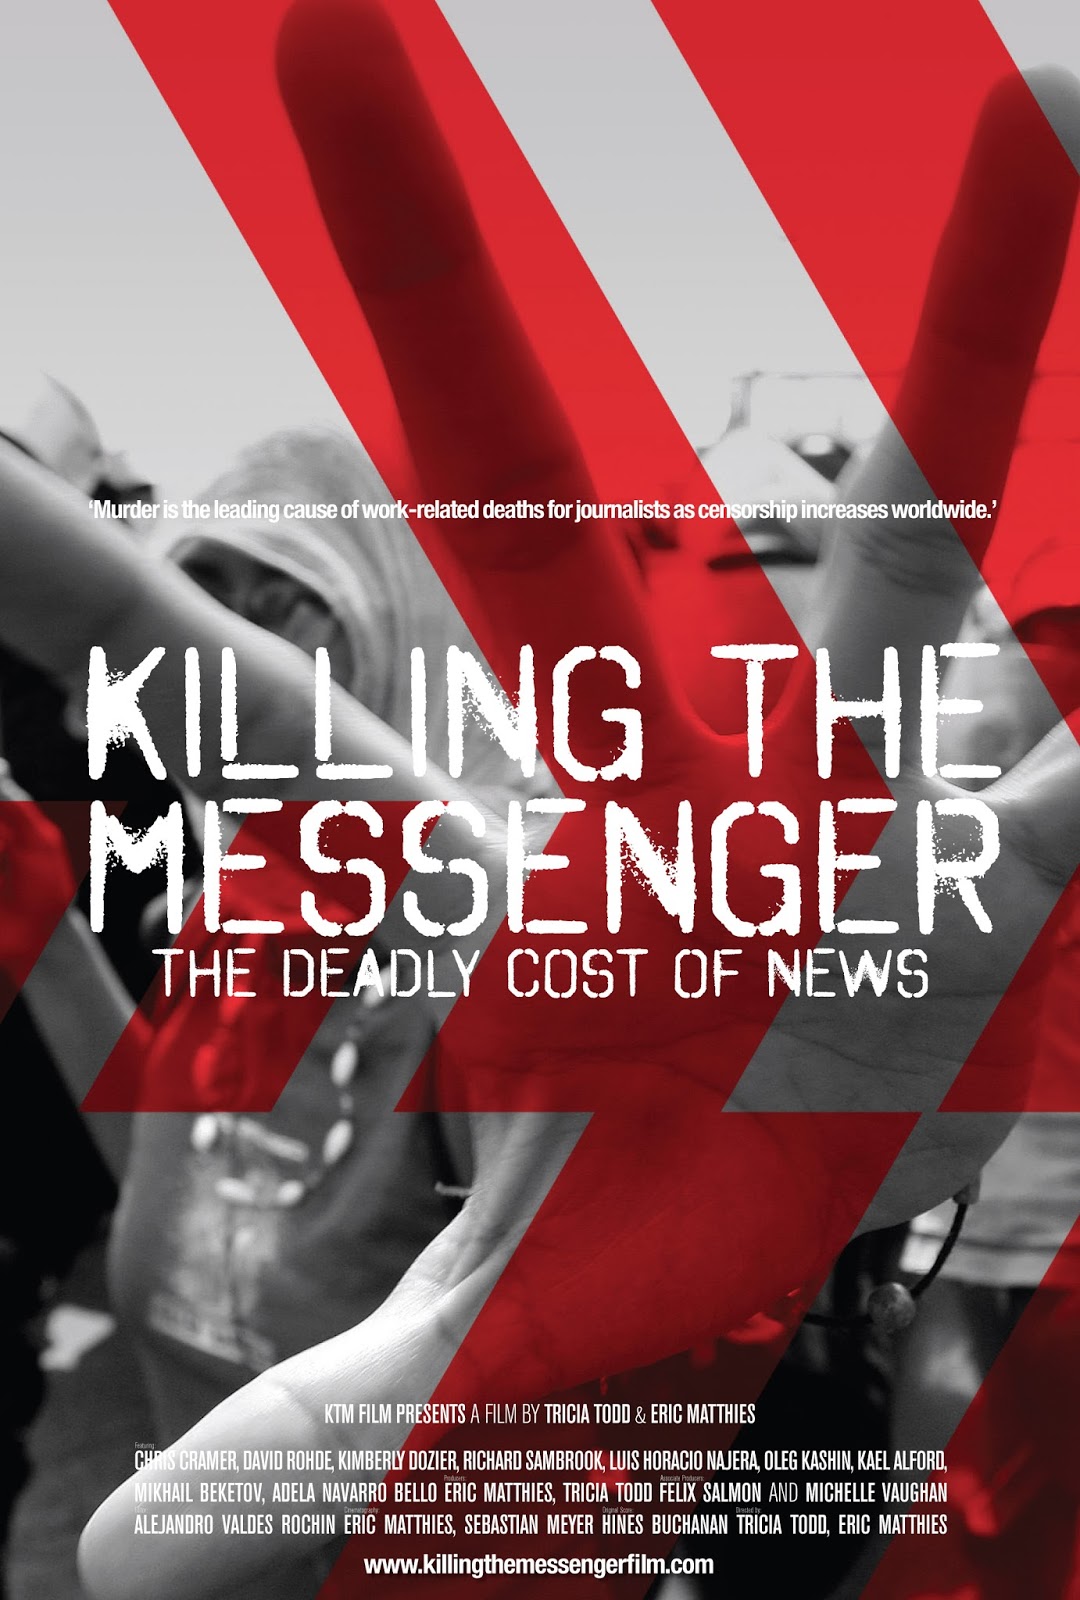 The Deadly Cost of News